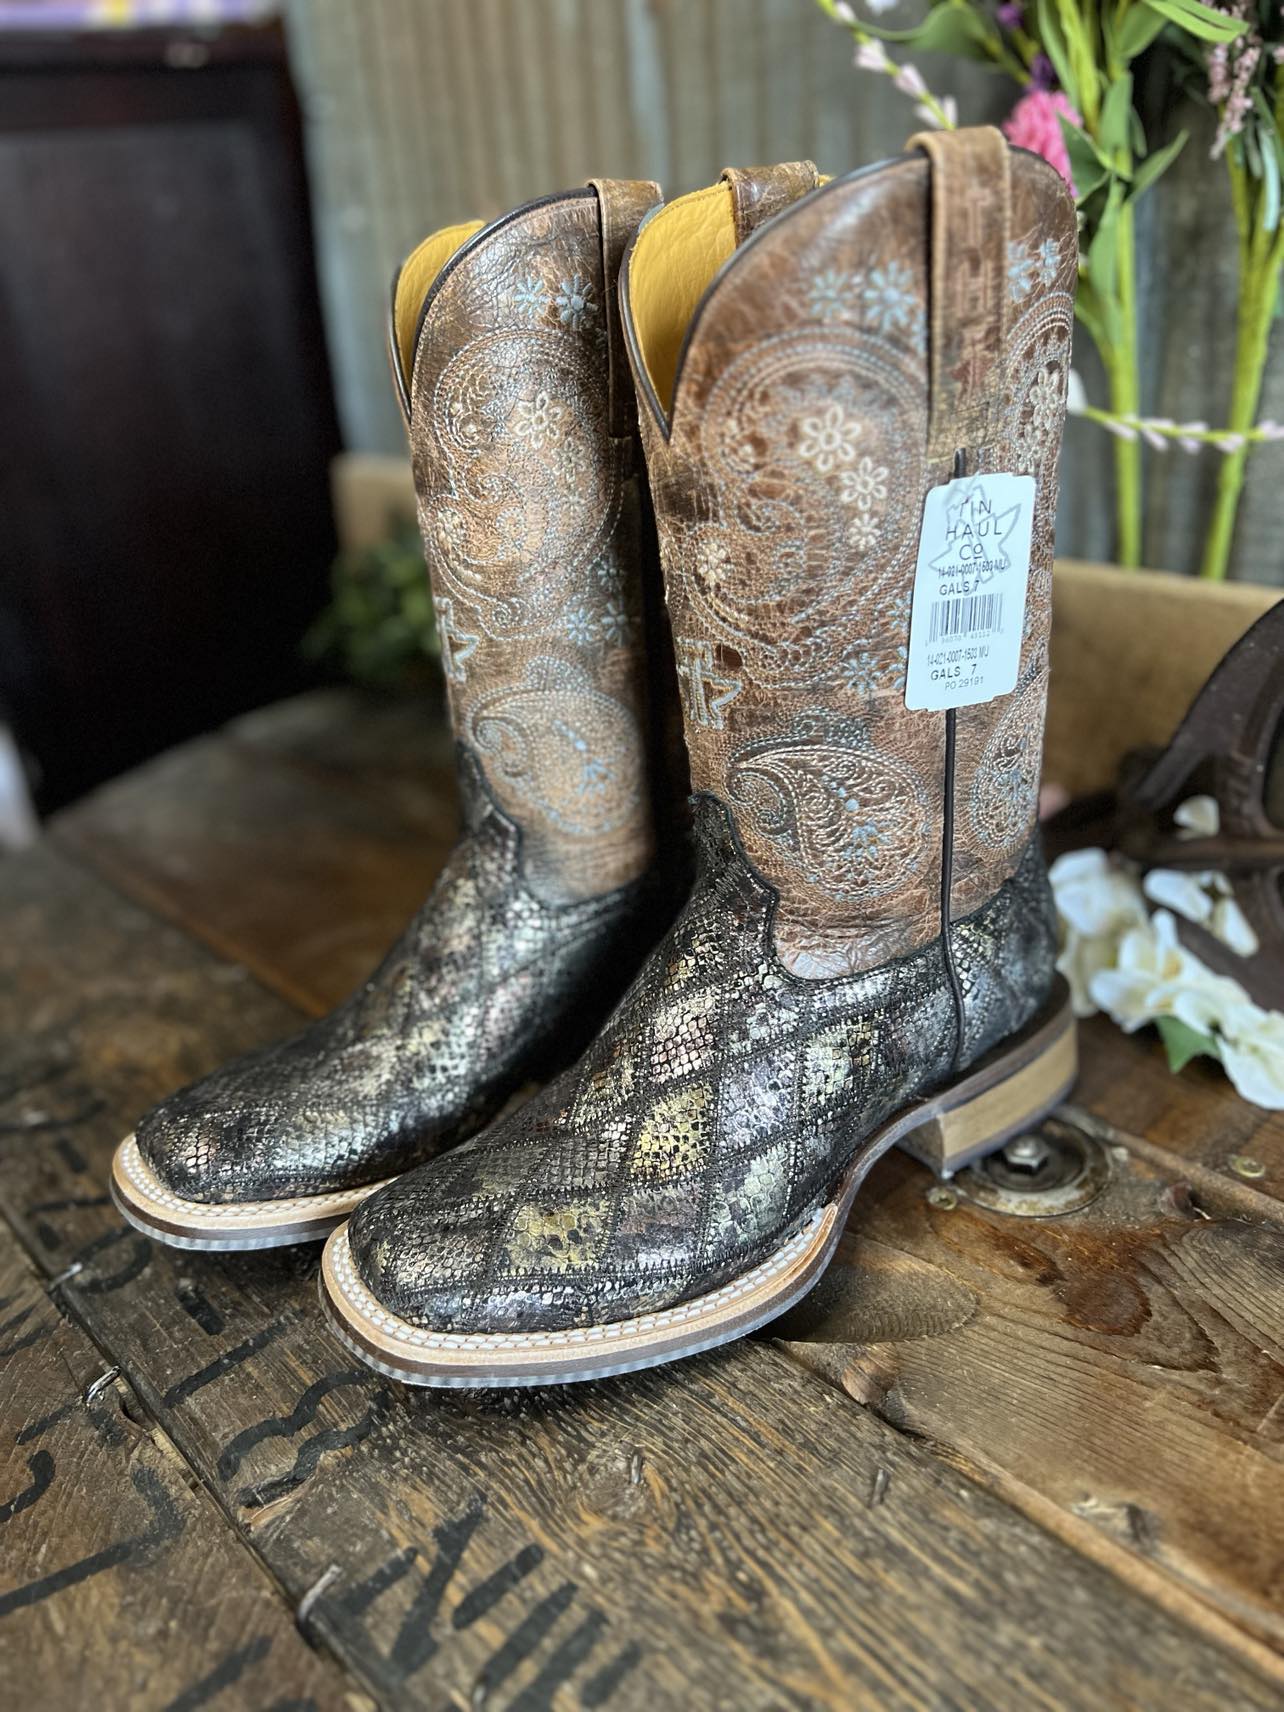 Women's Tin Haul Paisely Python Square Toe Boots-Women's Boots-Tin Haul-Lucky J Boots & More, Women's, Men's, & Kids Western Store Located in Carthage, MO